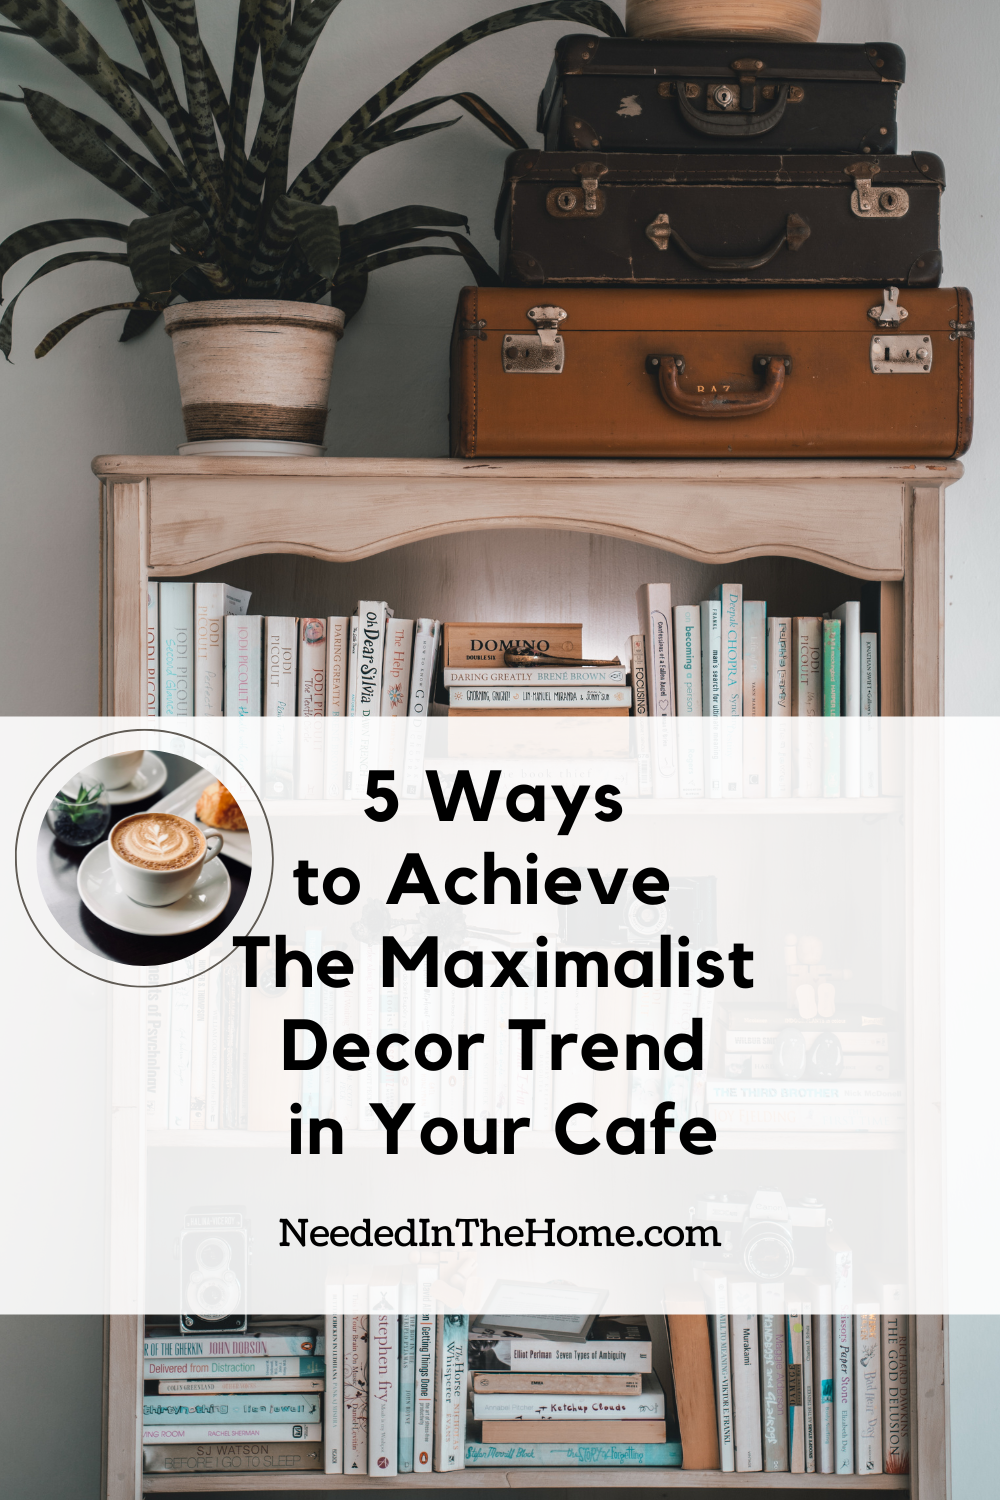 pinterest-pin-description 5 ways to achieve the maximalist decor trend in your cafe bookshelf books game luggage plant coffee neededinthehome